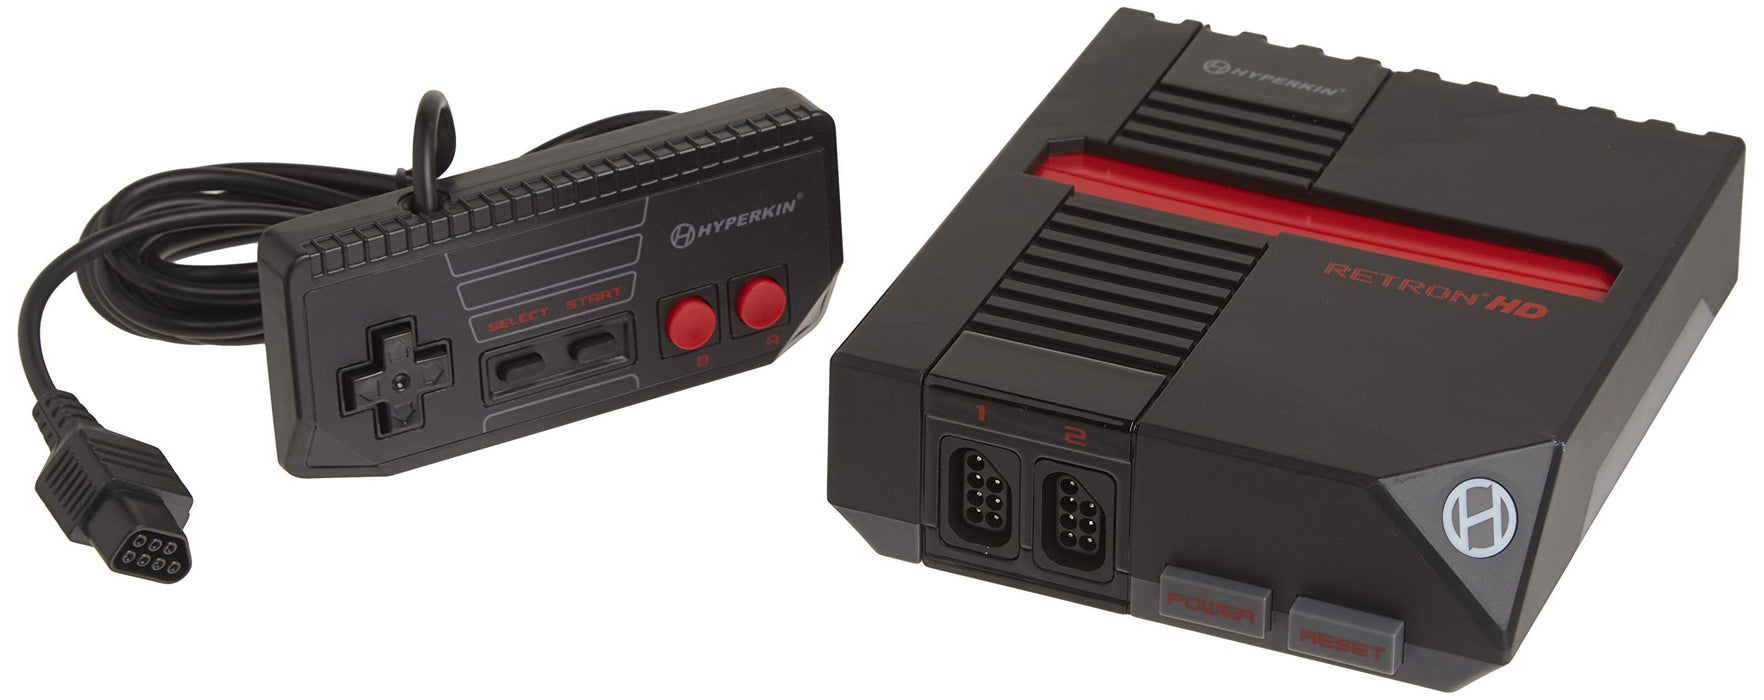 Hyperkin RetroN 1 HD Gaming Console for NES (Black)